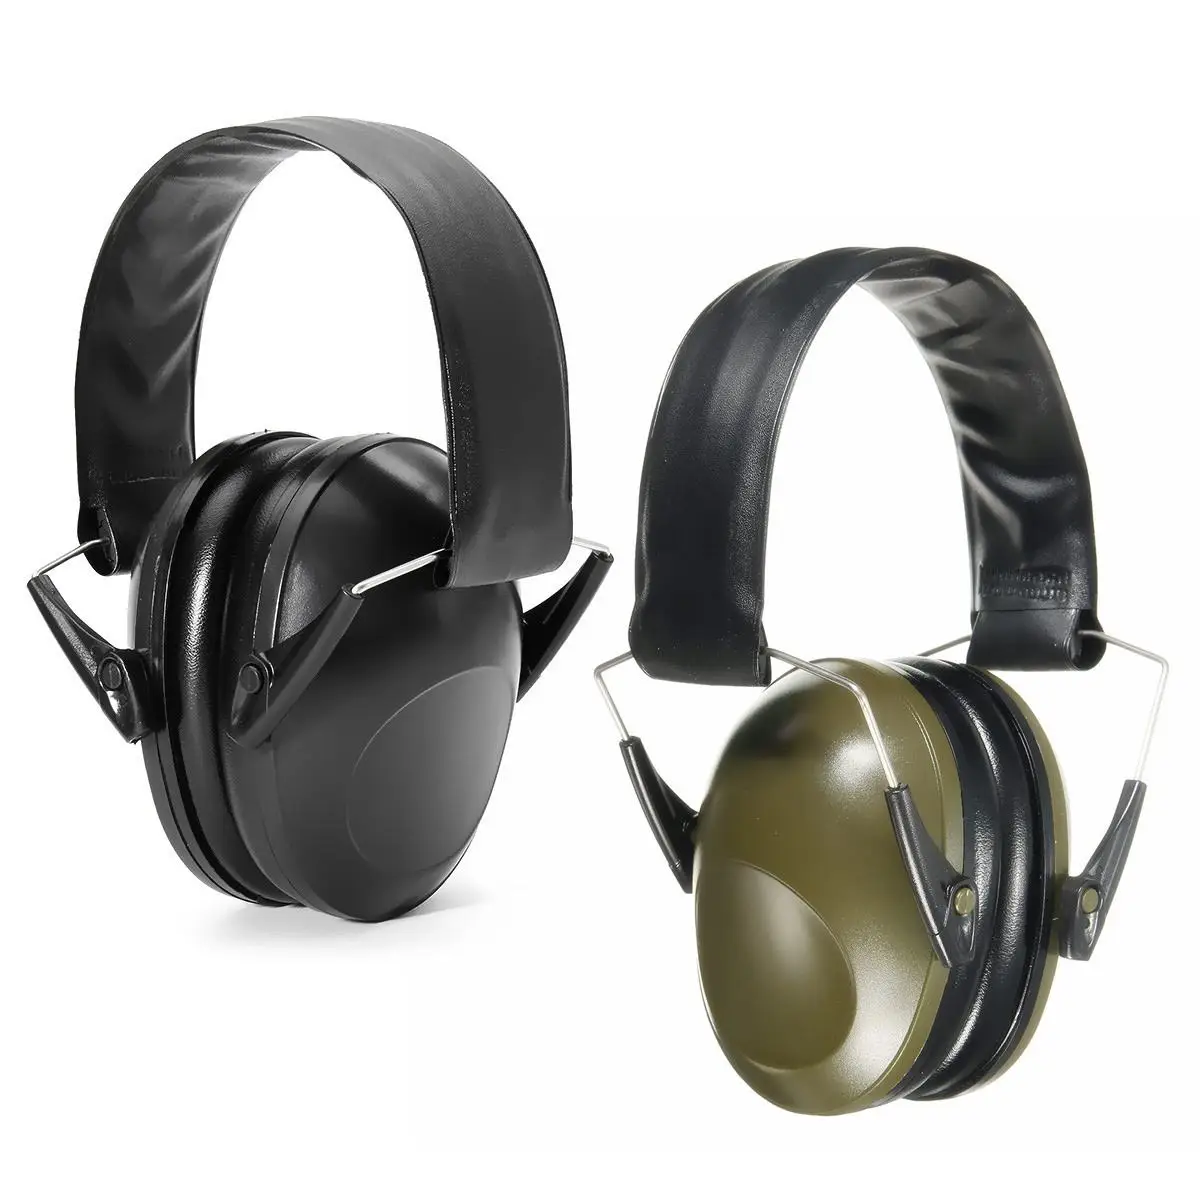 Anti-noise Ear Protector Ear Muff Hearing Protection Soundproof for Shooting Earmuffs Earphone Noise Redution Workplace Safety